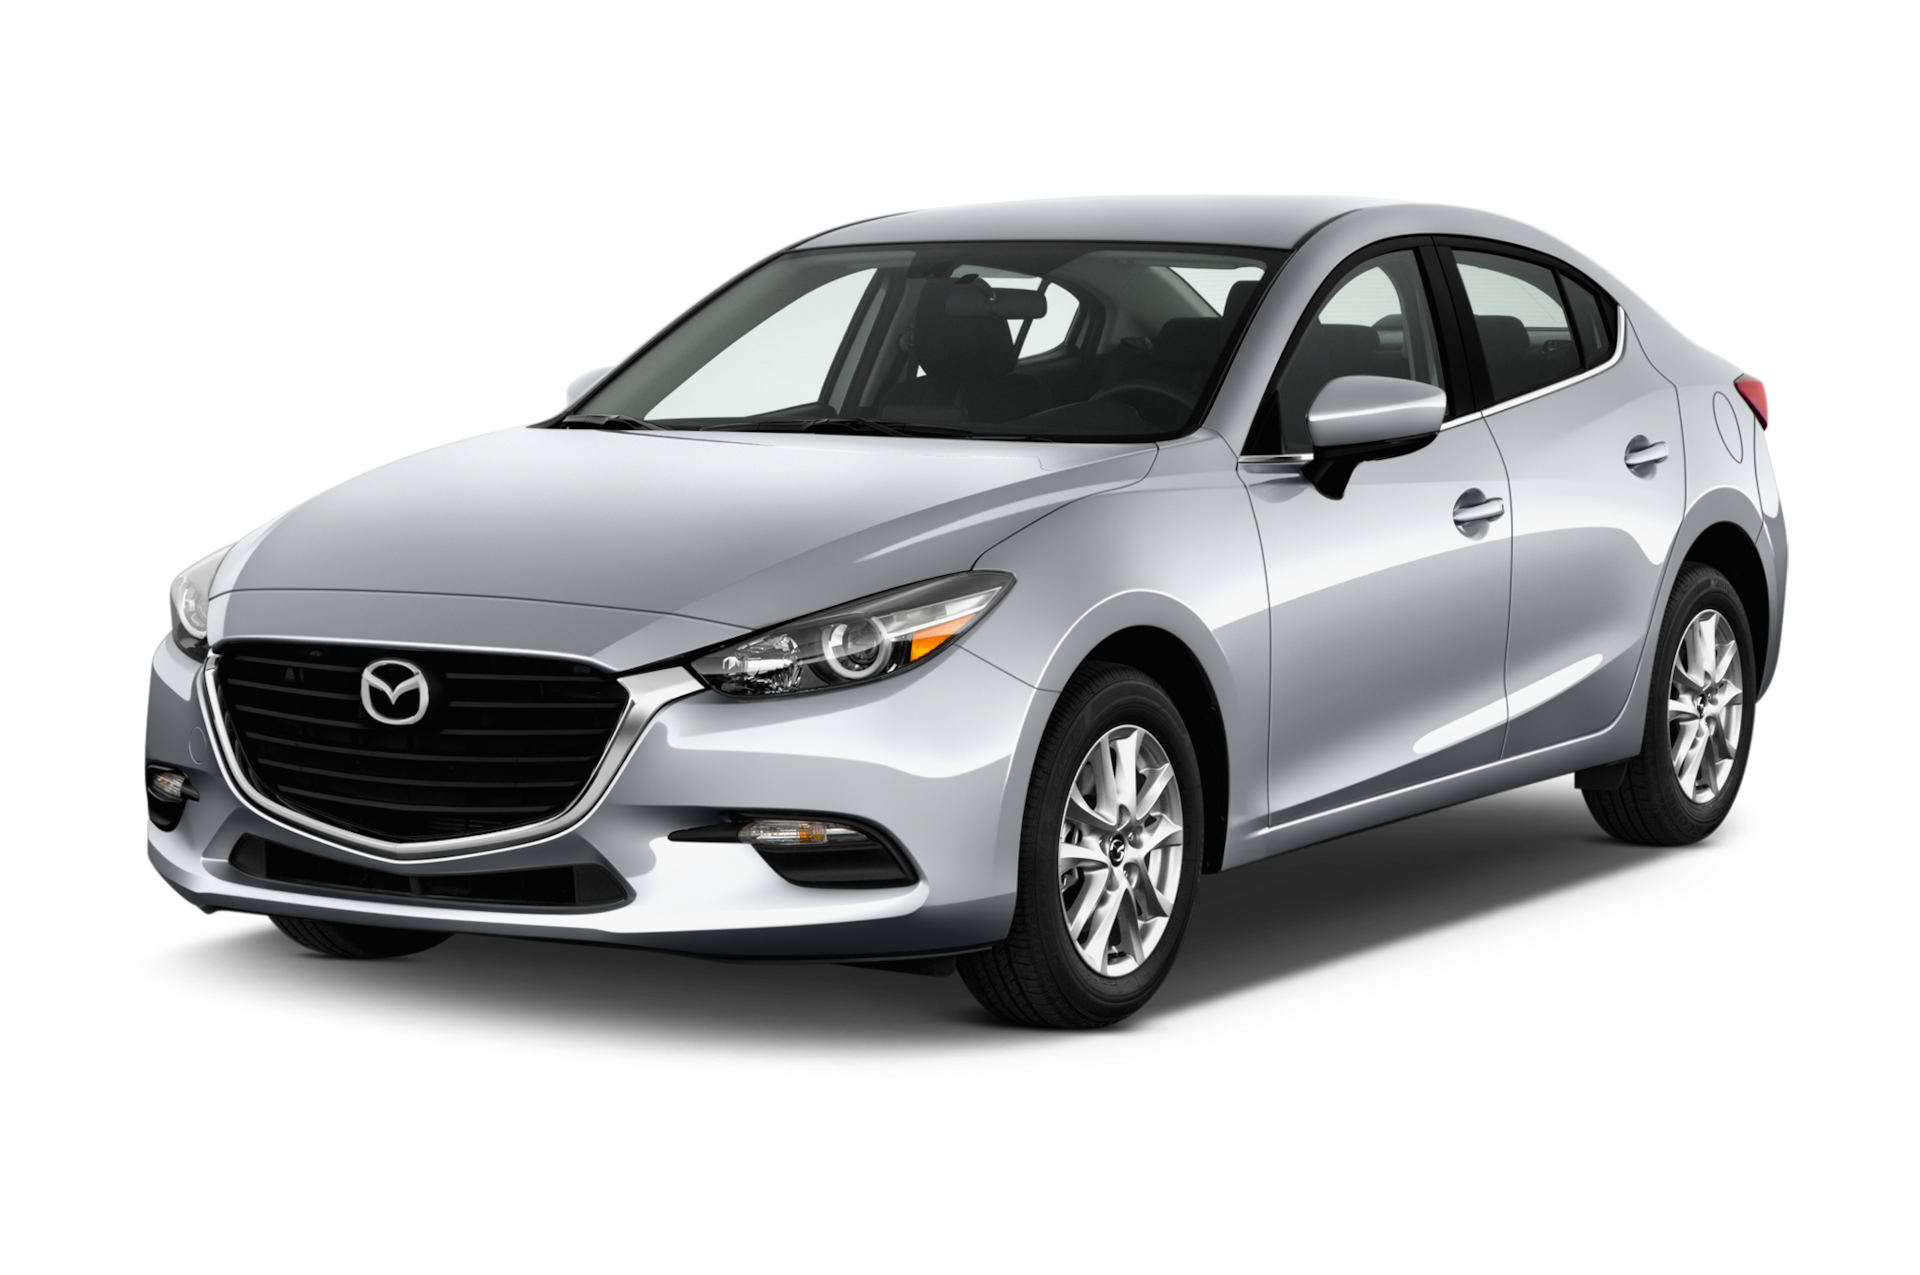 2017 Mazda Mazda3 Prices, Reviews, and Photos - MotorTrend